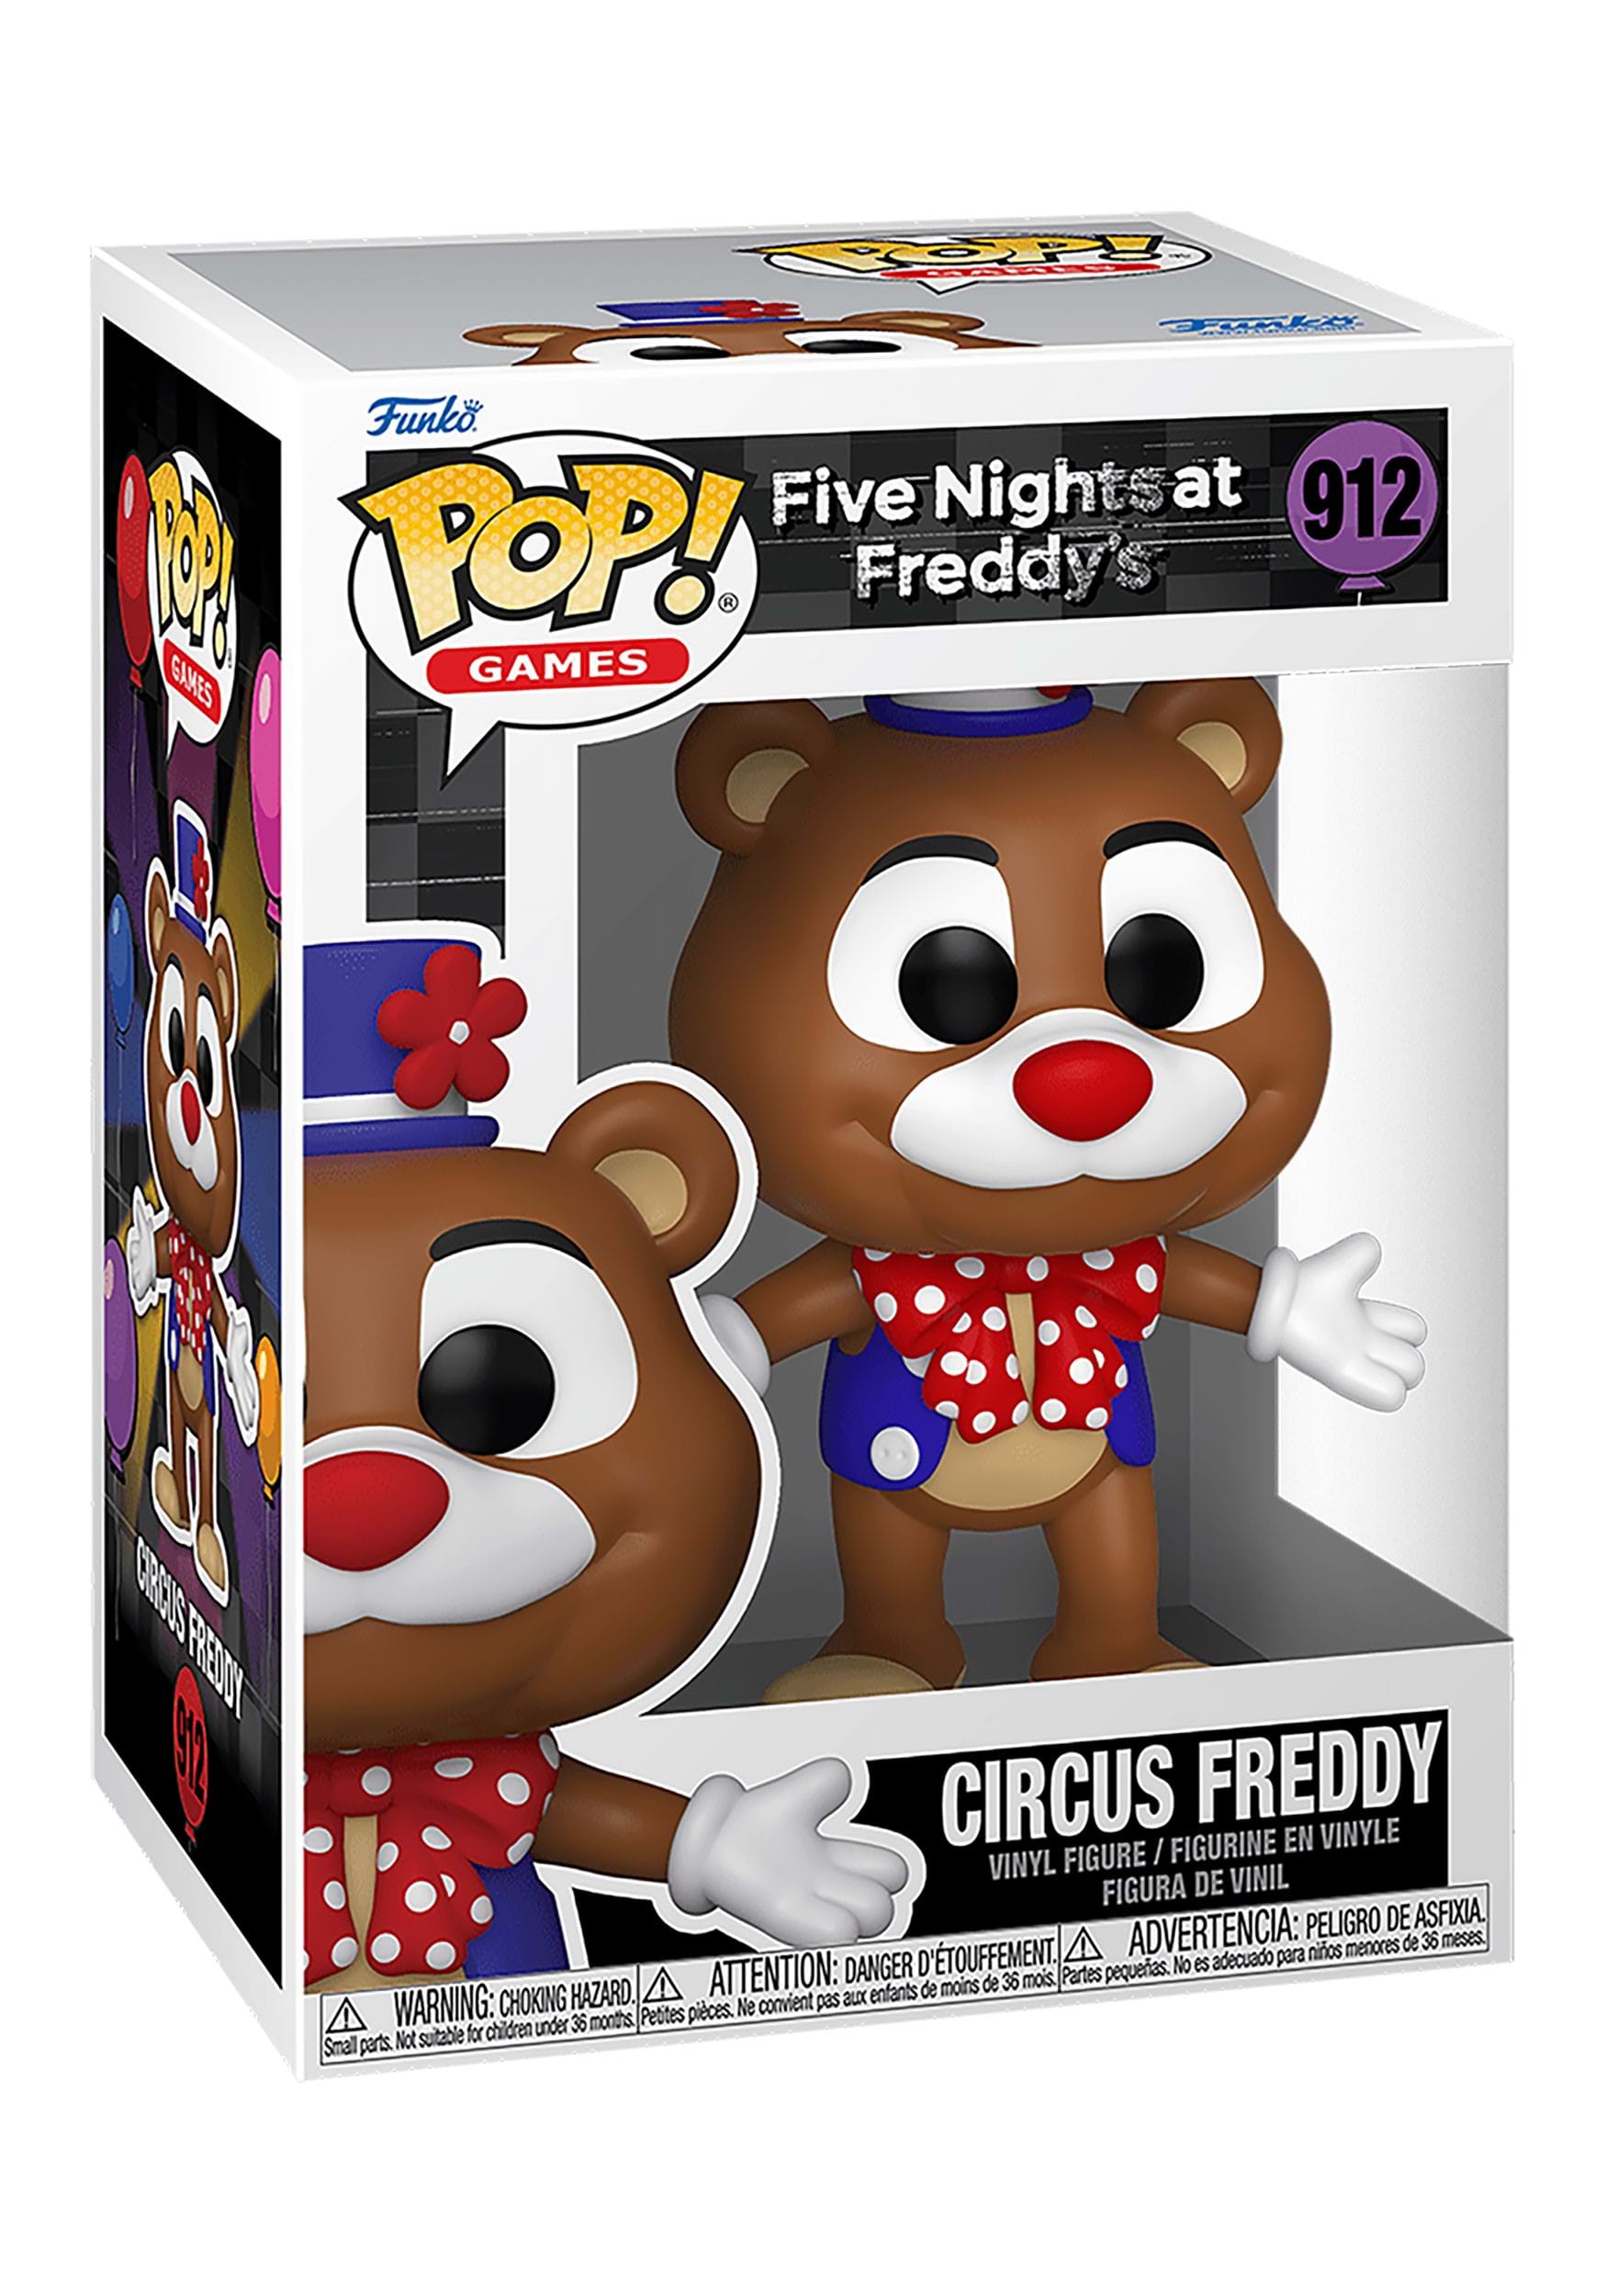 https://images.fun.com/products/90722/2-1-266341/pop-games-five-nights-at-freddys-circus-freddy-alt-1.jpg